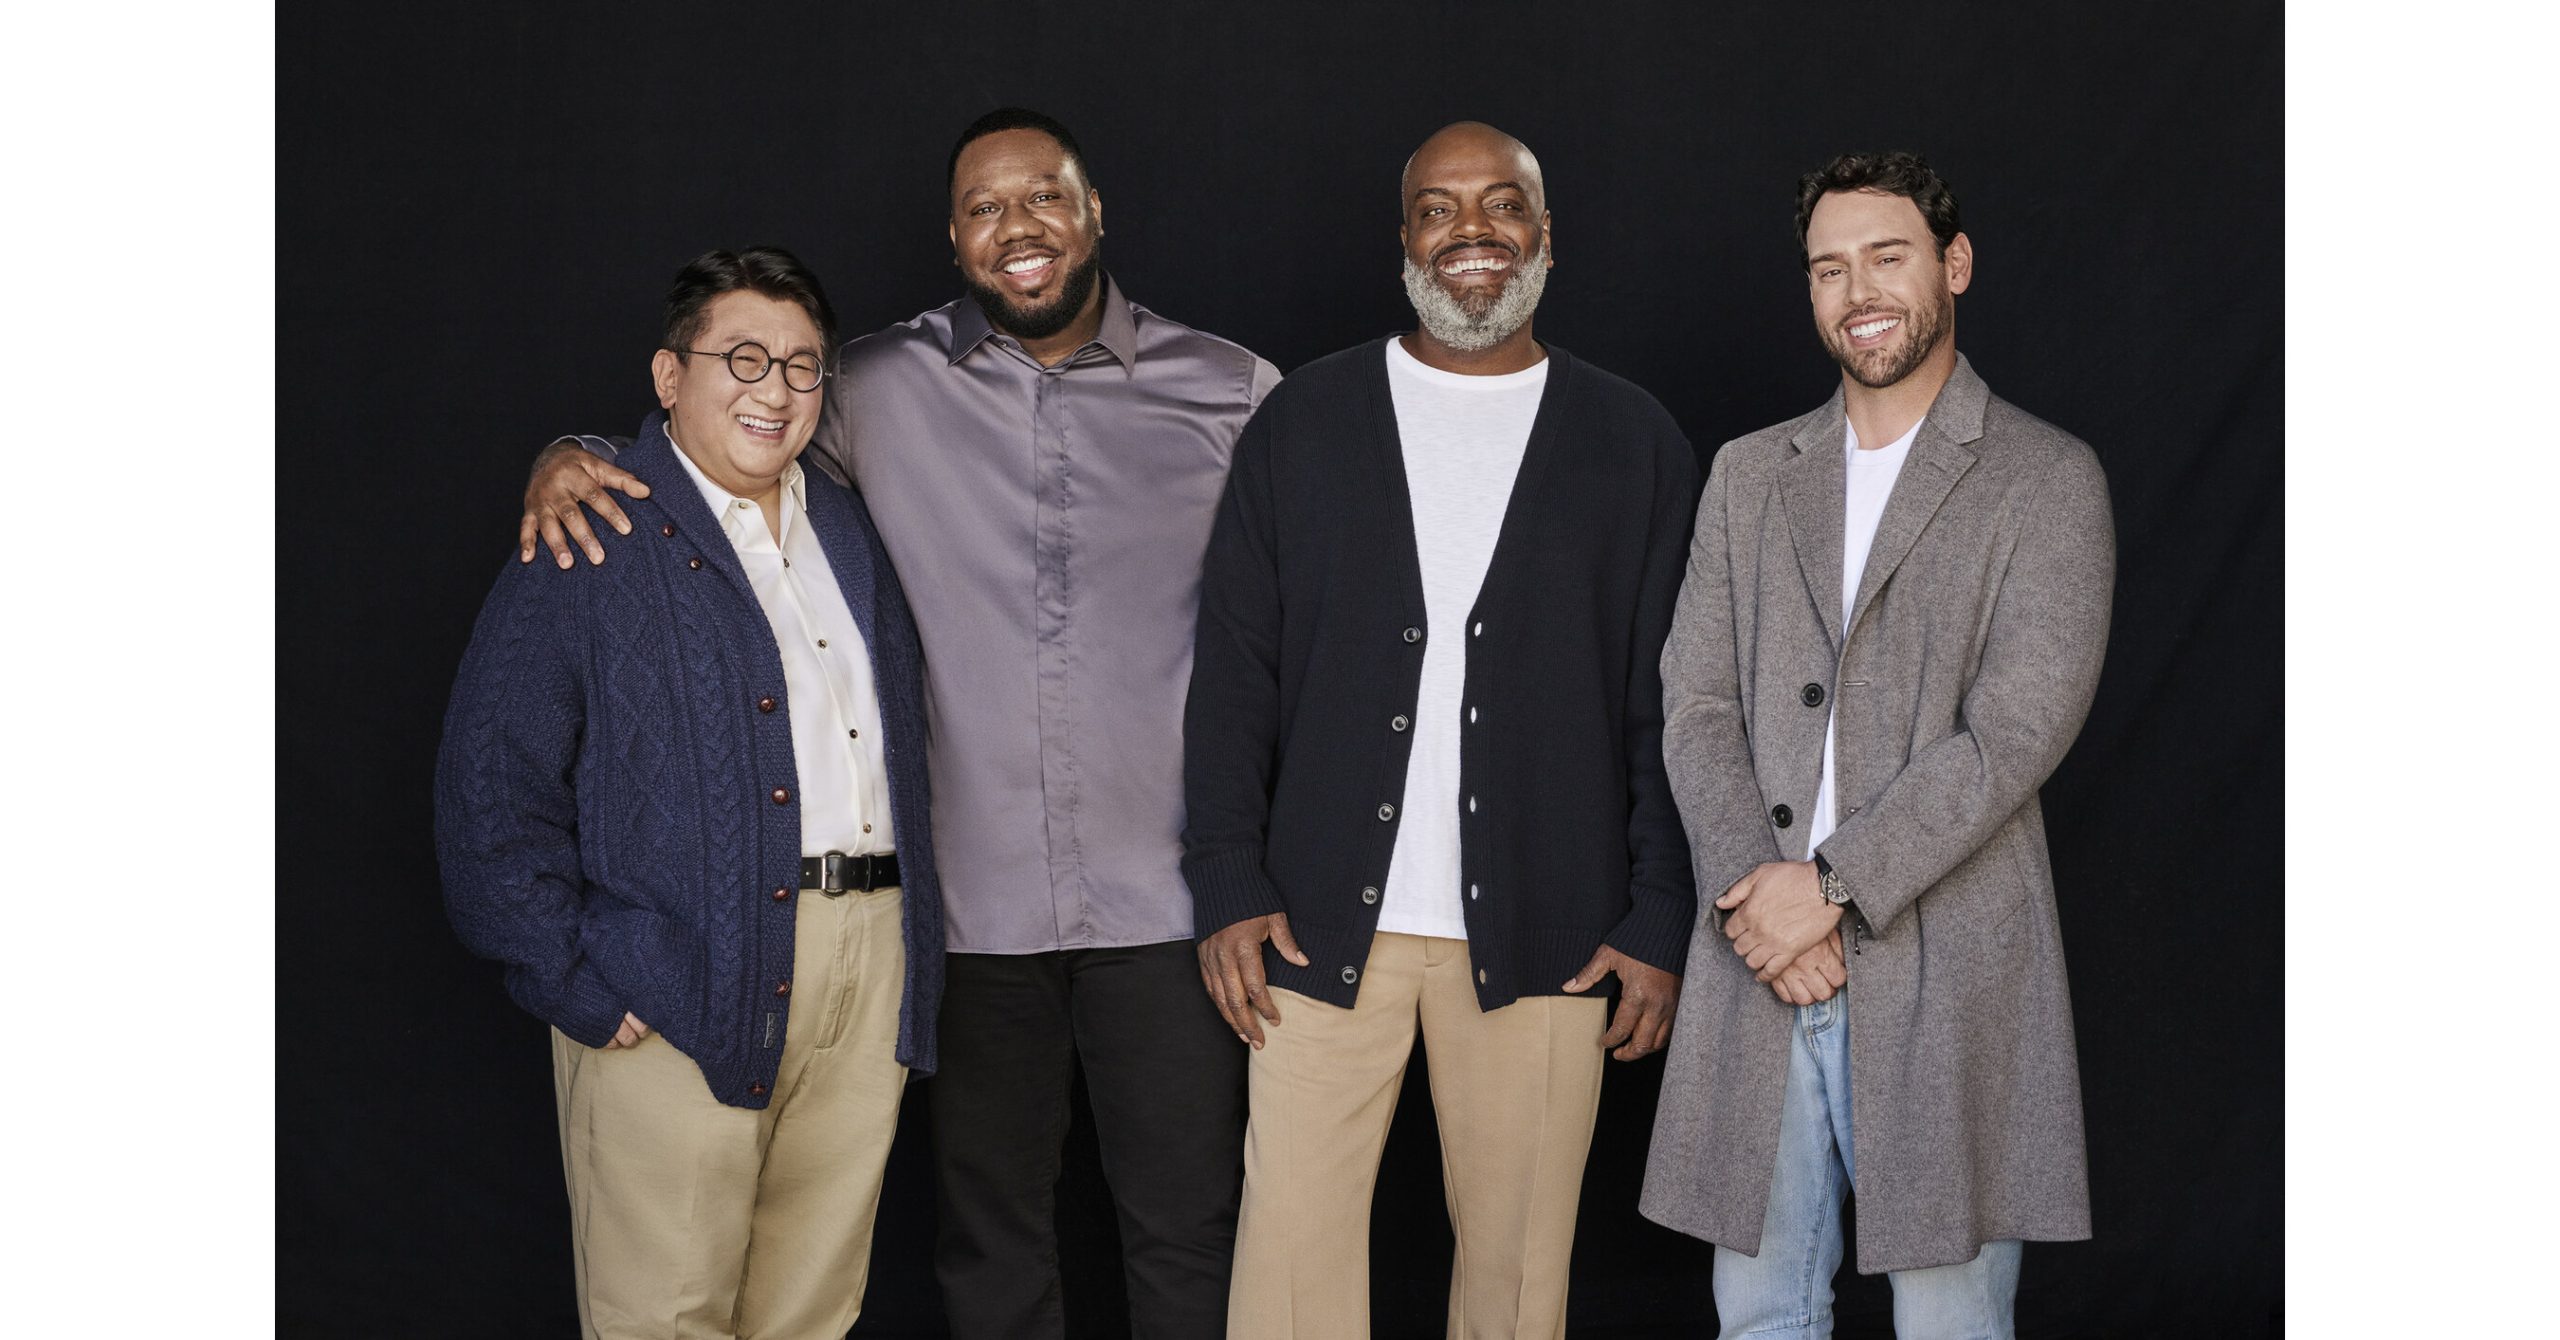 HYBE Makes Historic Key Acquisition, Merging with QC Media Holdings, Inc., Parent Company of Pierre “P” Thomas and Kevin “Coach K” Lee, Advances HYBE’s Ambition to Become a Global Entertainment Leader